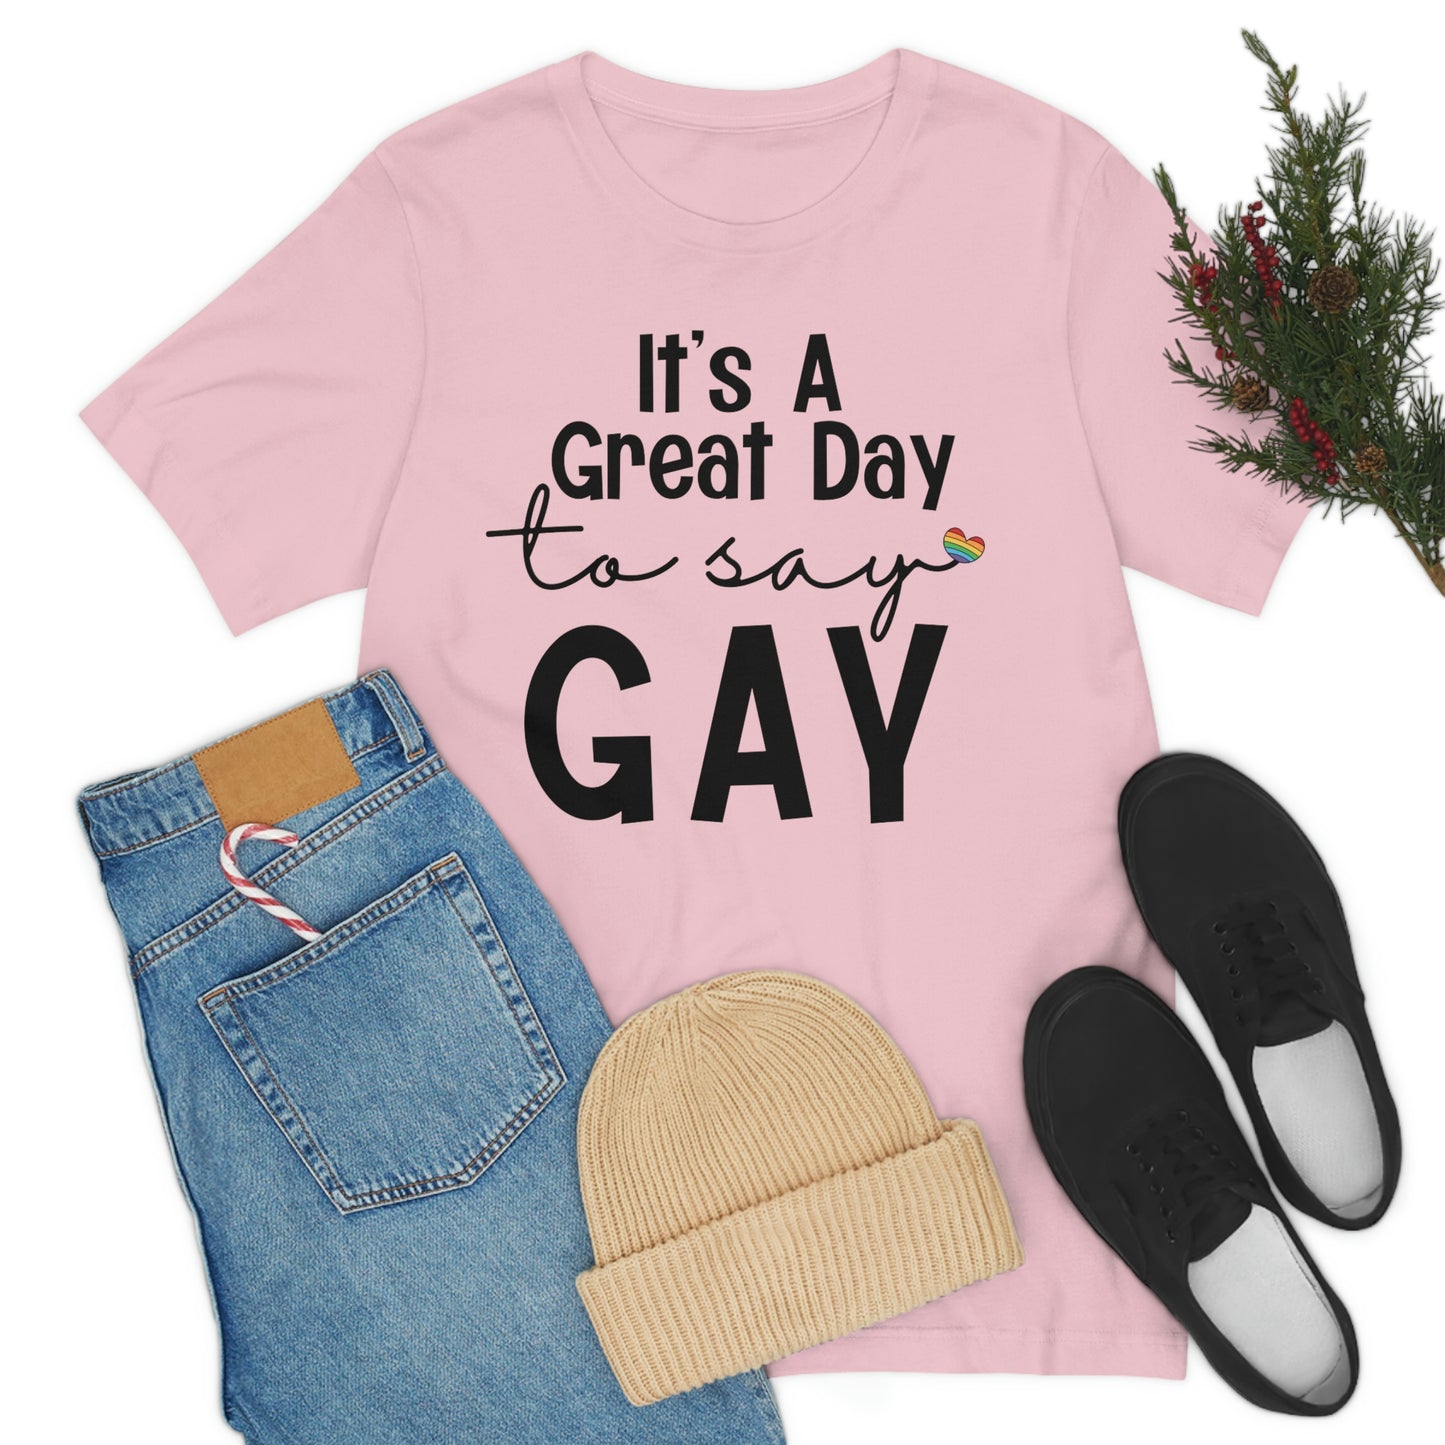 Pride: It's a Great Day to Say Gay - Jersey Short Sleeve Unisex Tee